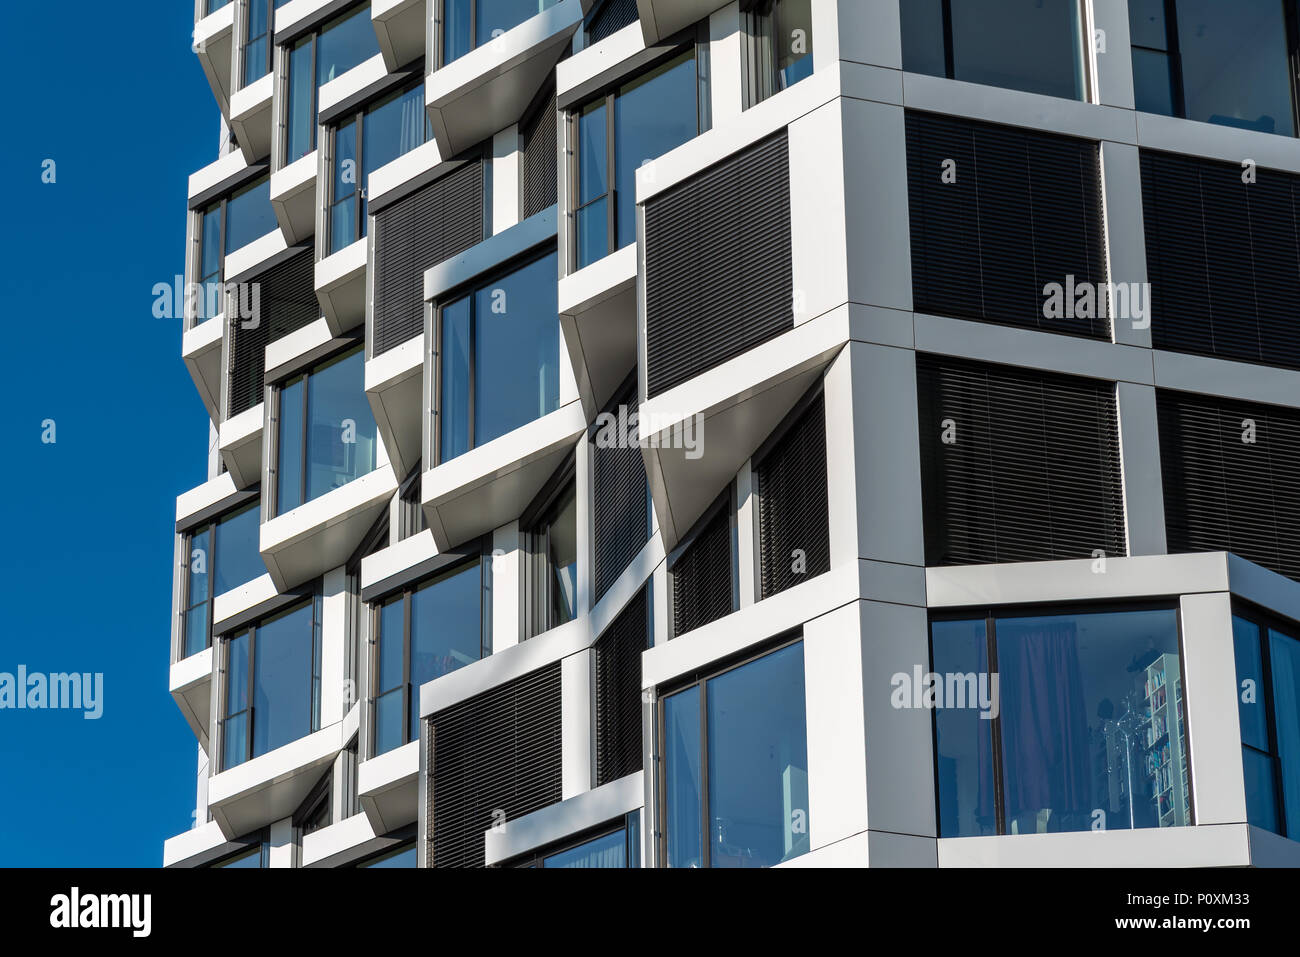 Detail of a modern high-rise apartment building seen in Munich, Germany Stock Photo